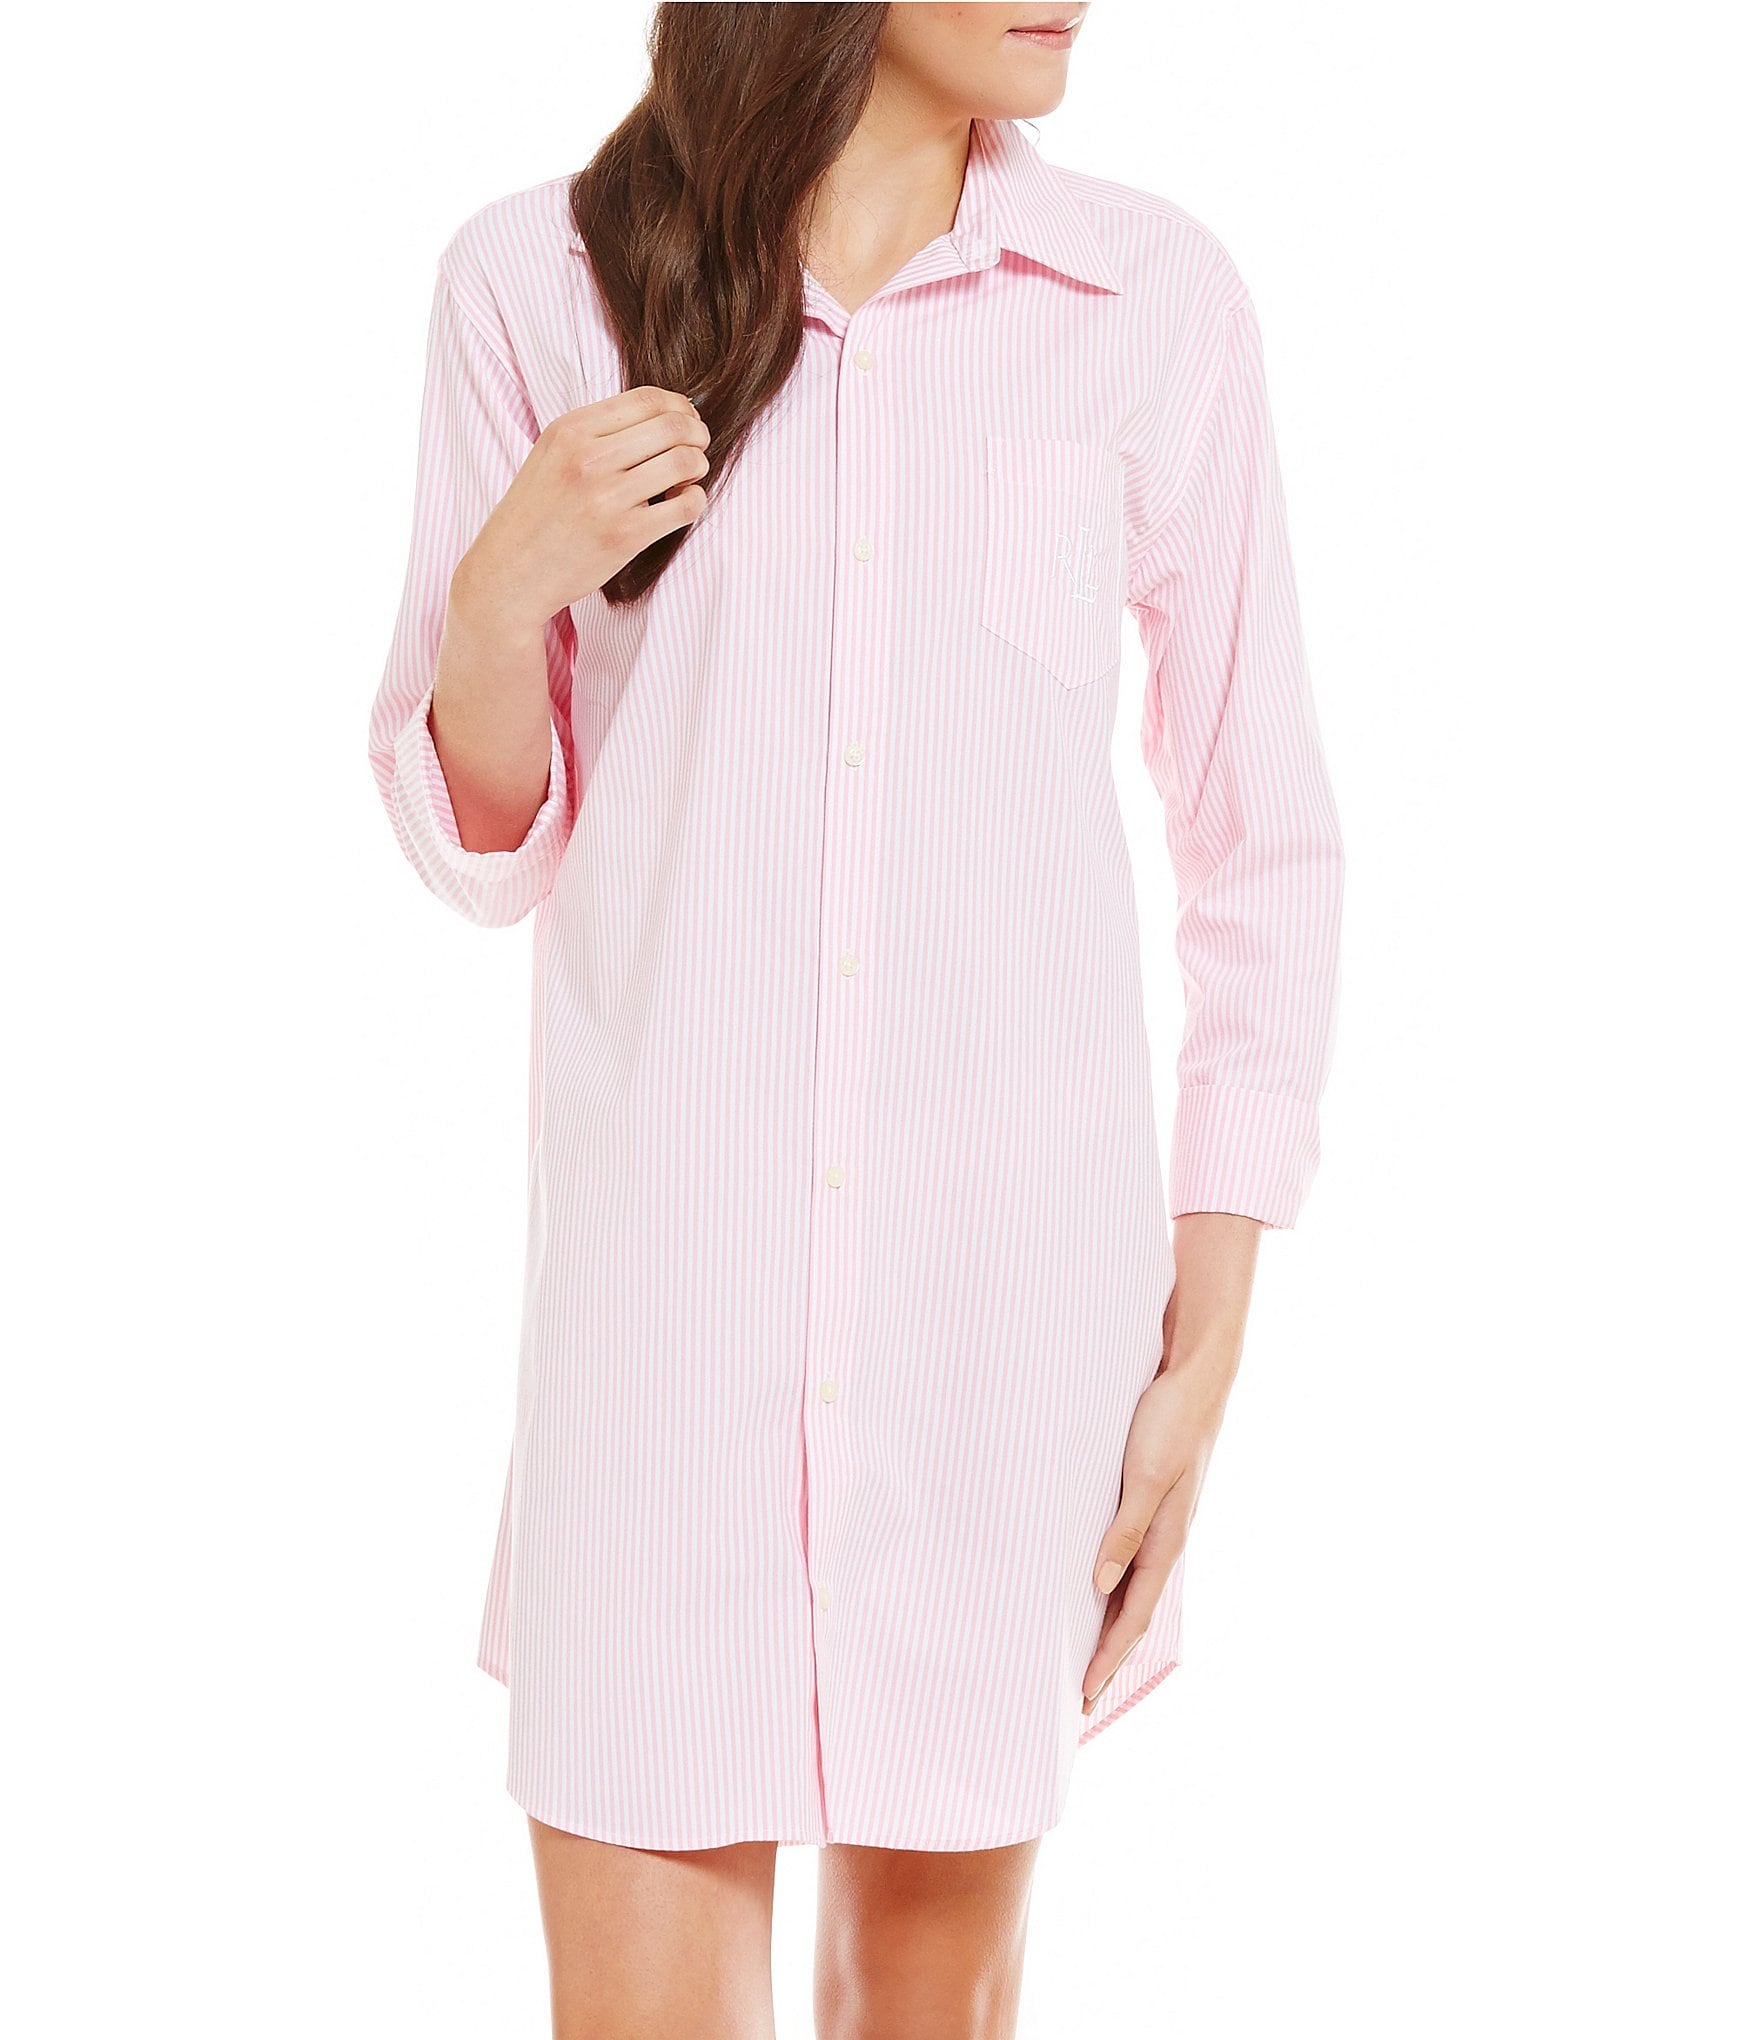 COLORFULLEAF 100% Cotton Nightgowns for Women - Button Down 3/4 Sleeve  Sleep Shirt in Soft Breathable Fabric - S-XXL